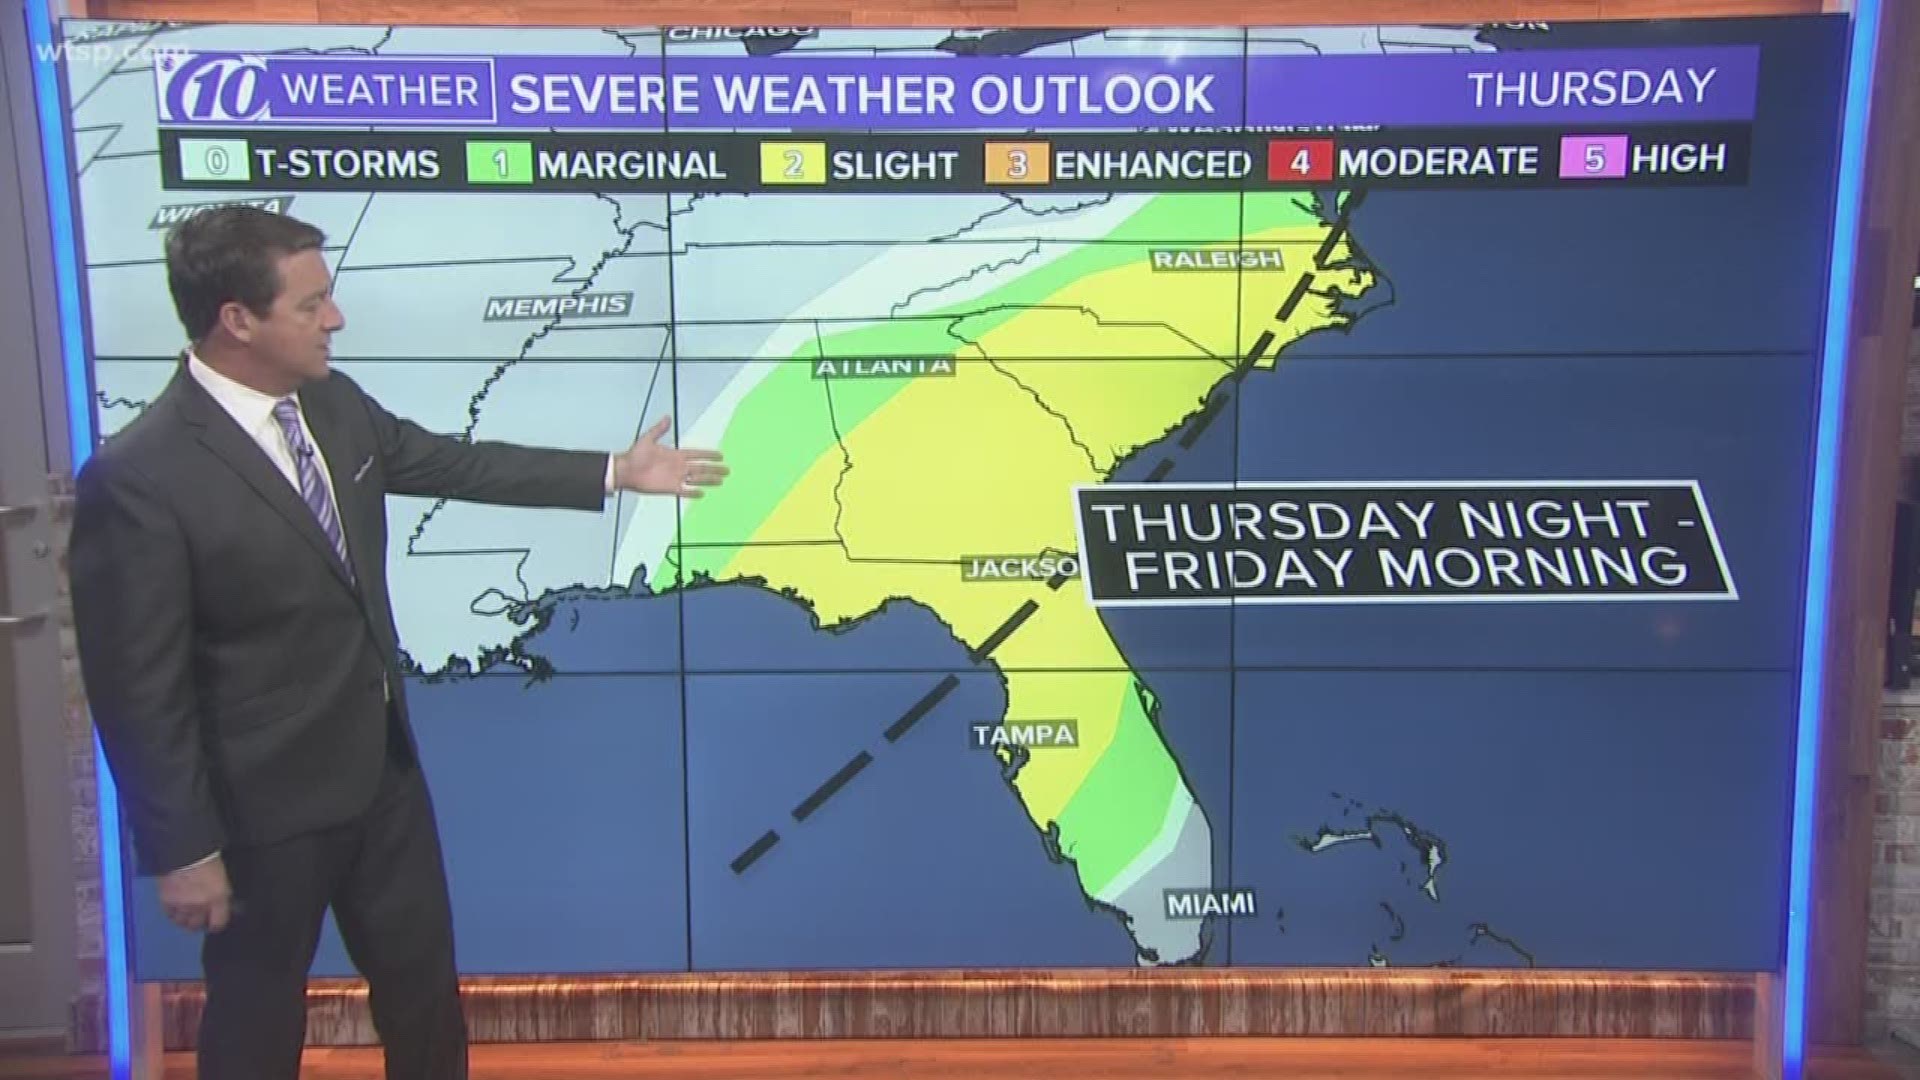 An overnight storm threat, plus severe weather in the mix, is likely in the works later this week for much of Florida.